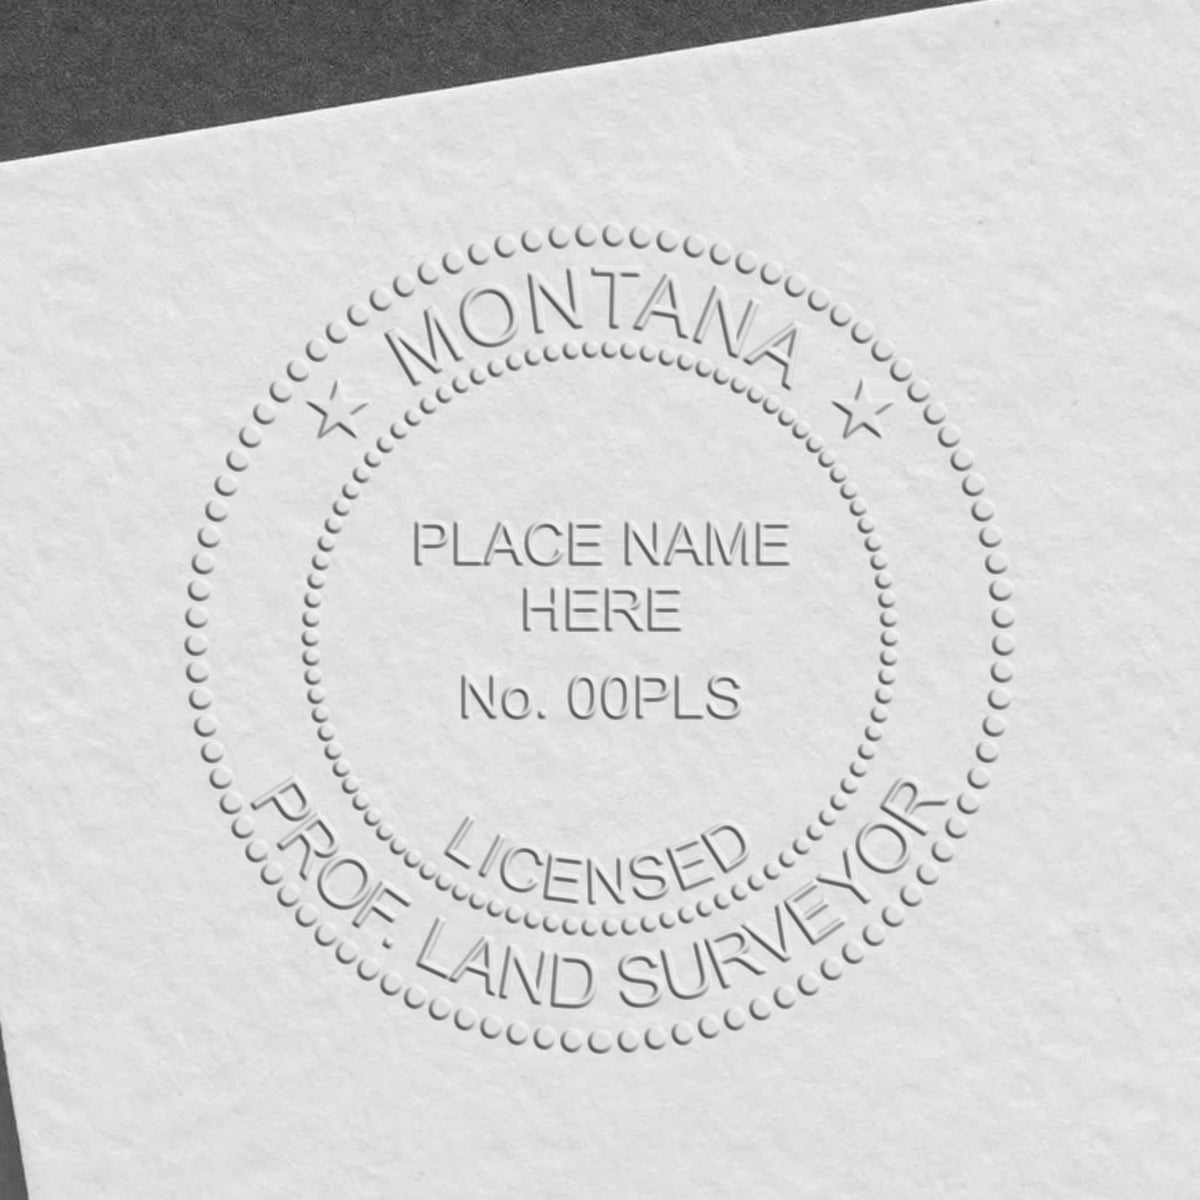 A photograph of the State of Montana Soft Land Surveyor Embossing Seal stamp impression reveals a vivid, professional image of the on paper.